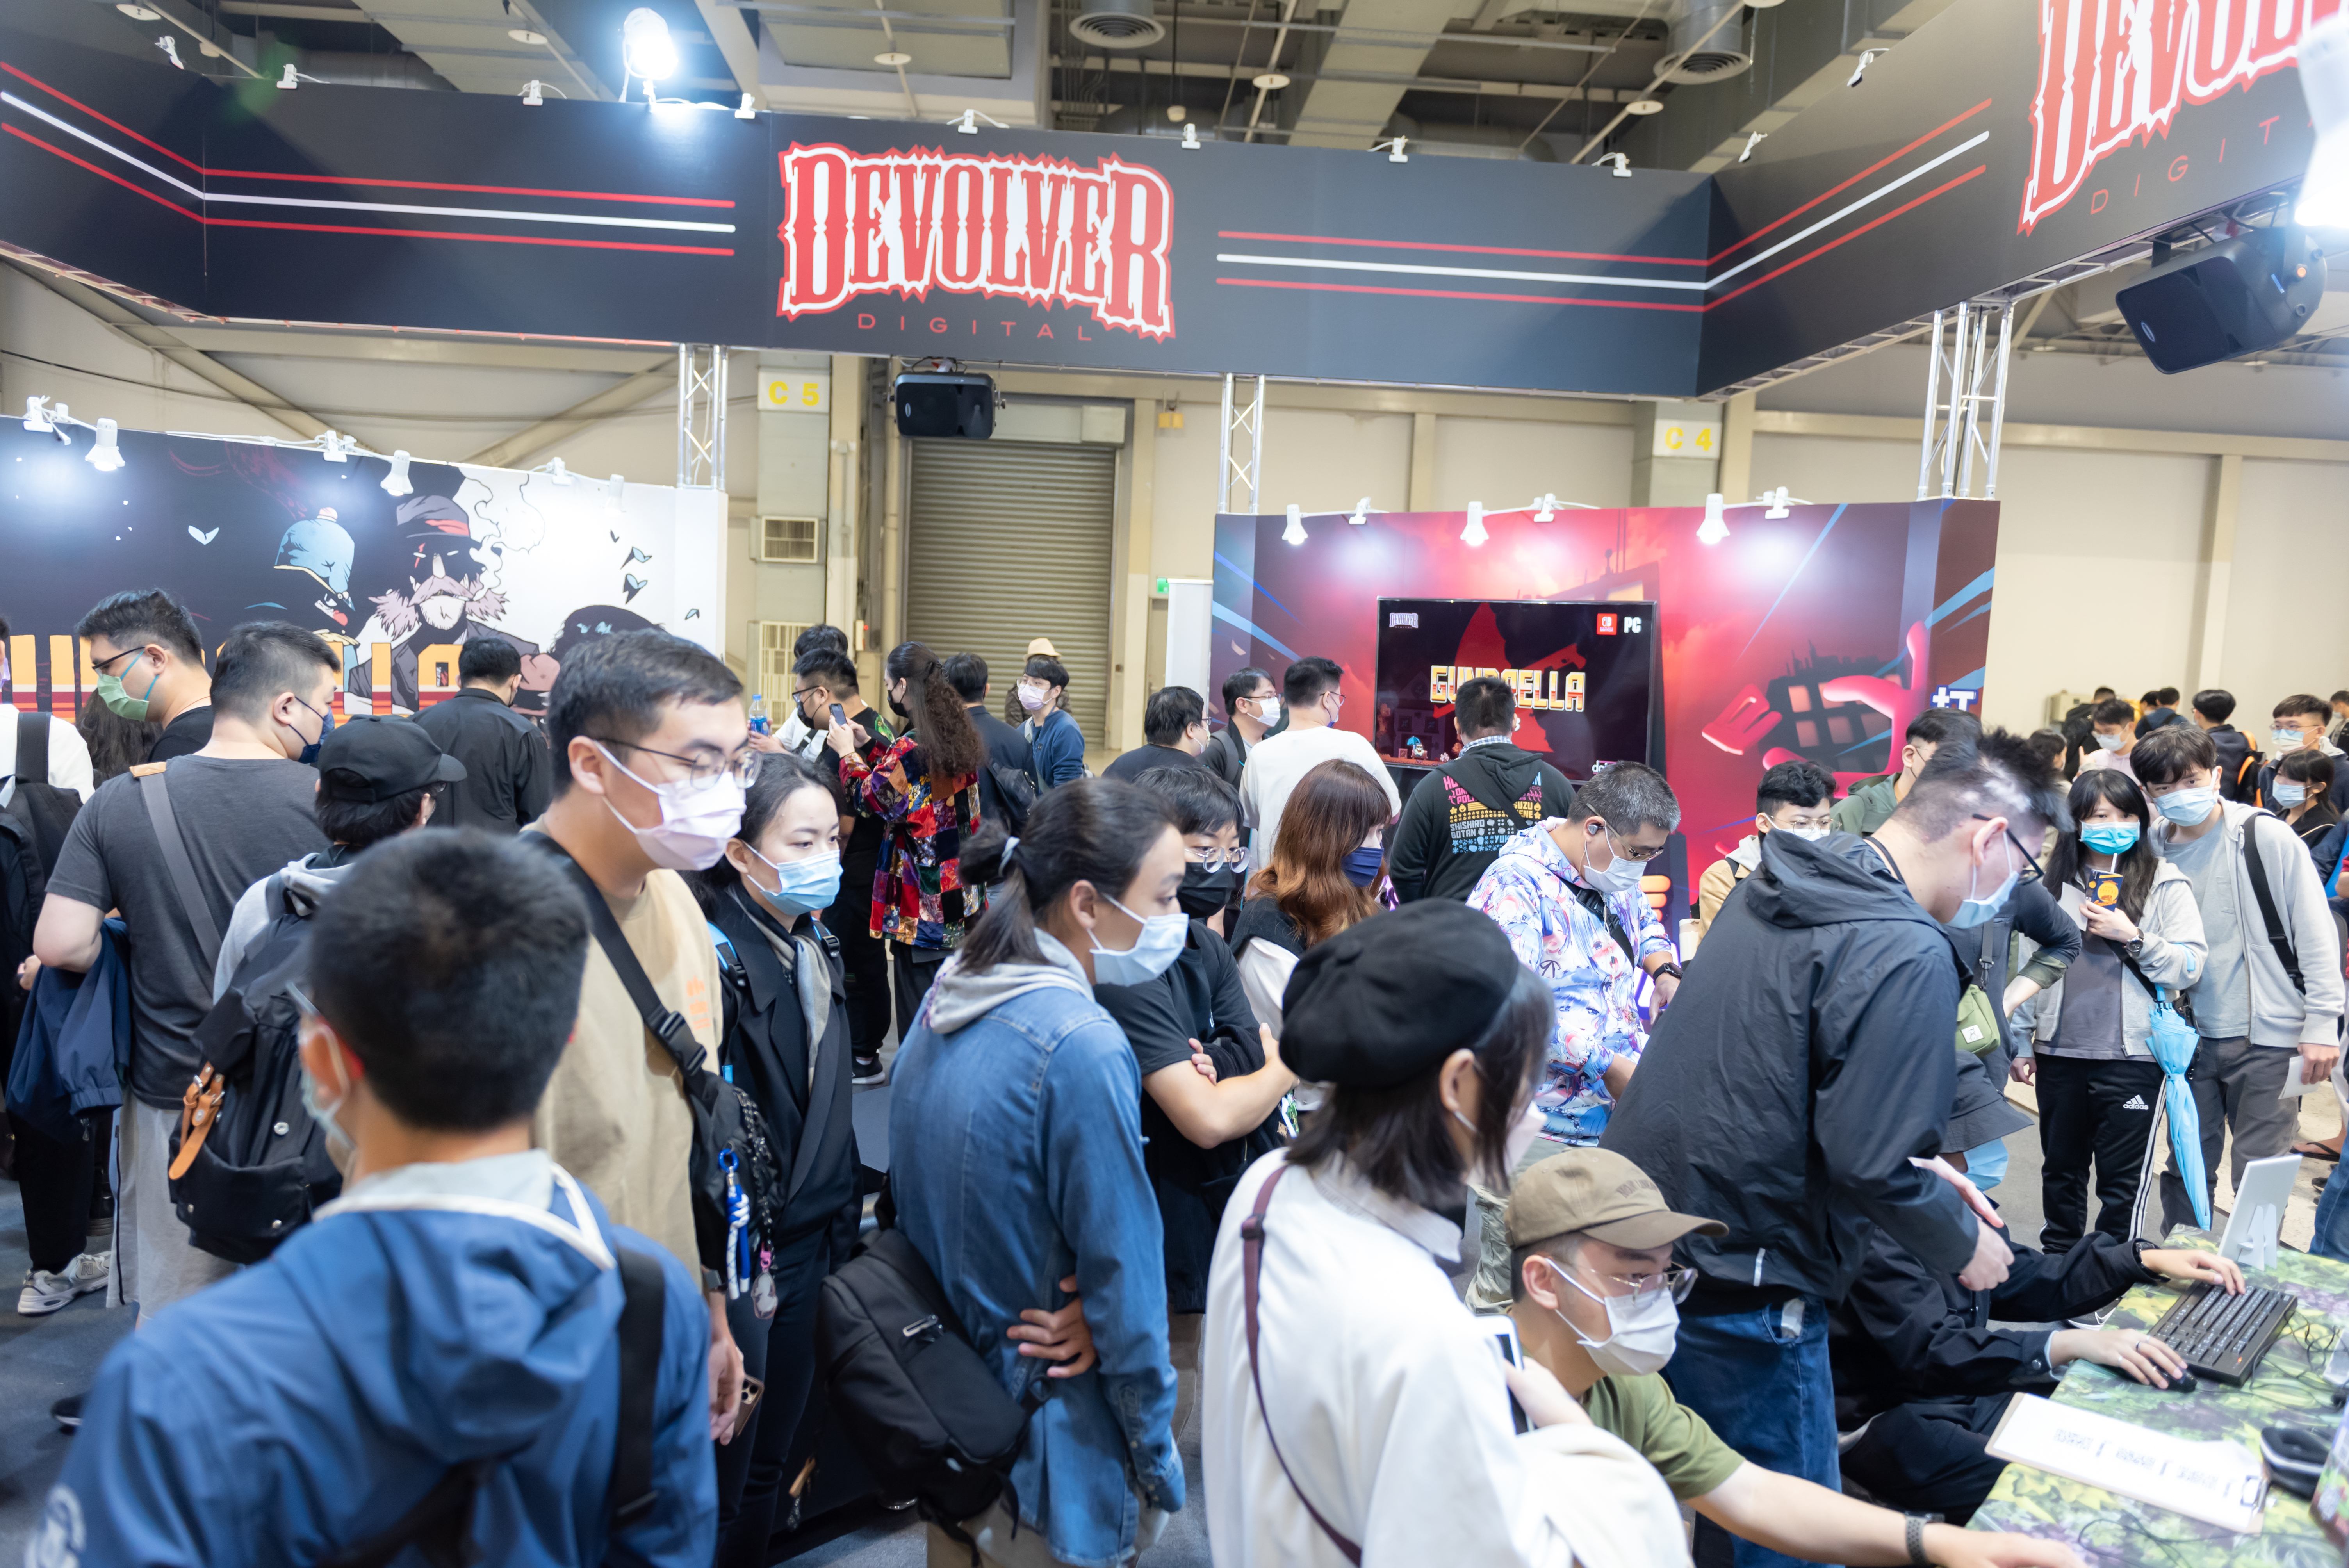 people handing around at Develvor Digital booth at G-EIGHT game show